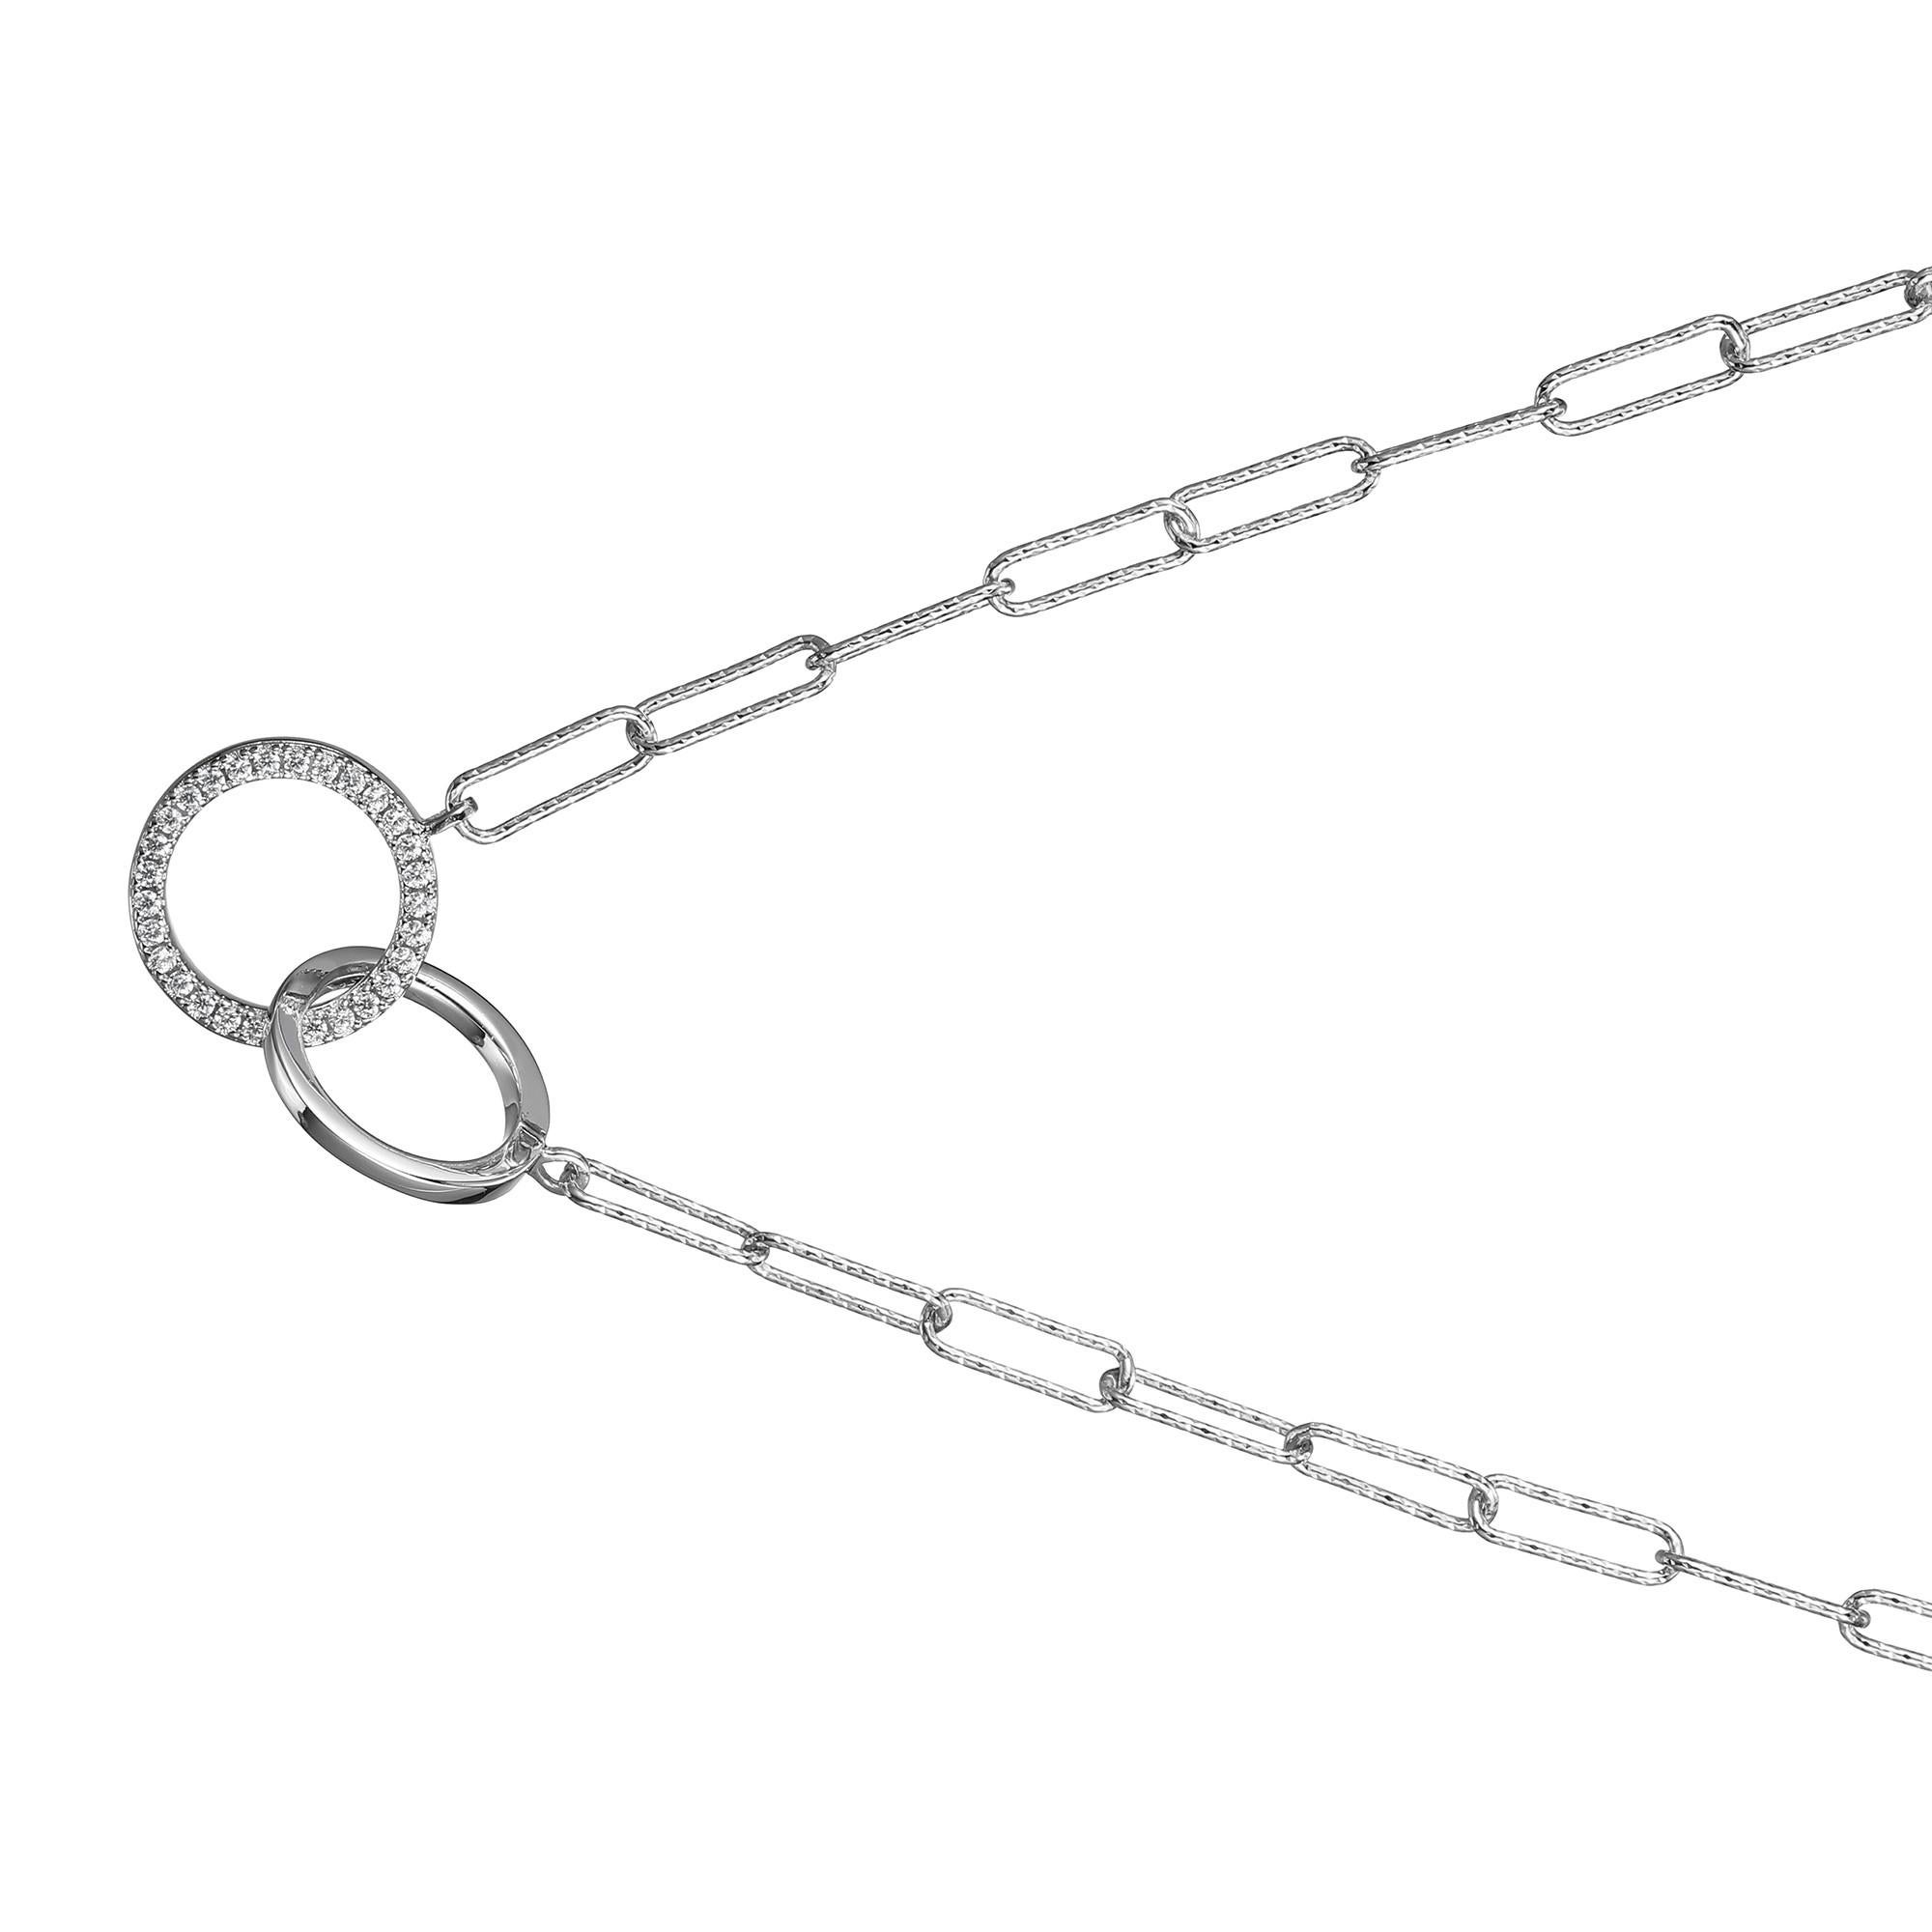 Sterling Silver Necklace made with Diamond Cut Paperclip Chain (3mm) and 2 Circles in Center, Measures 17